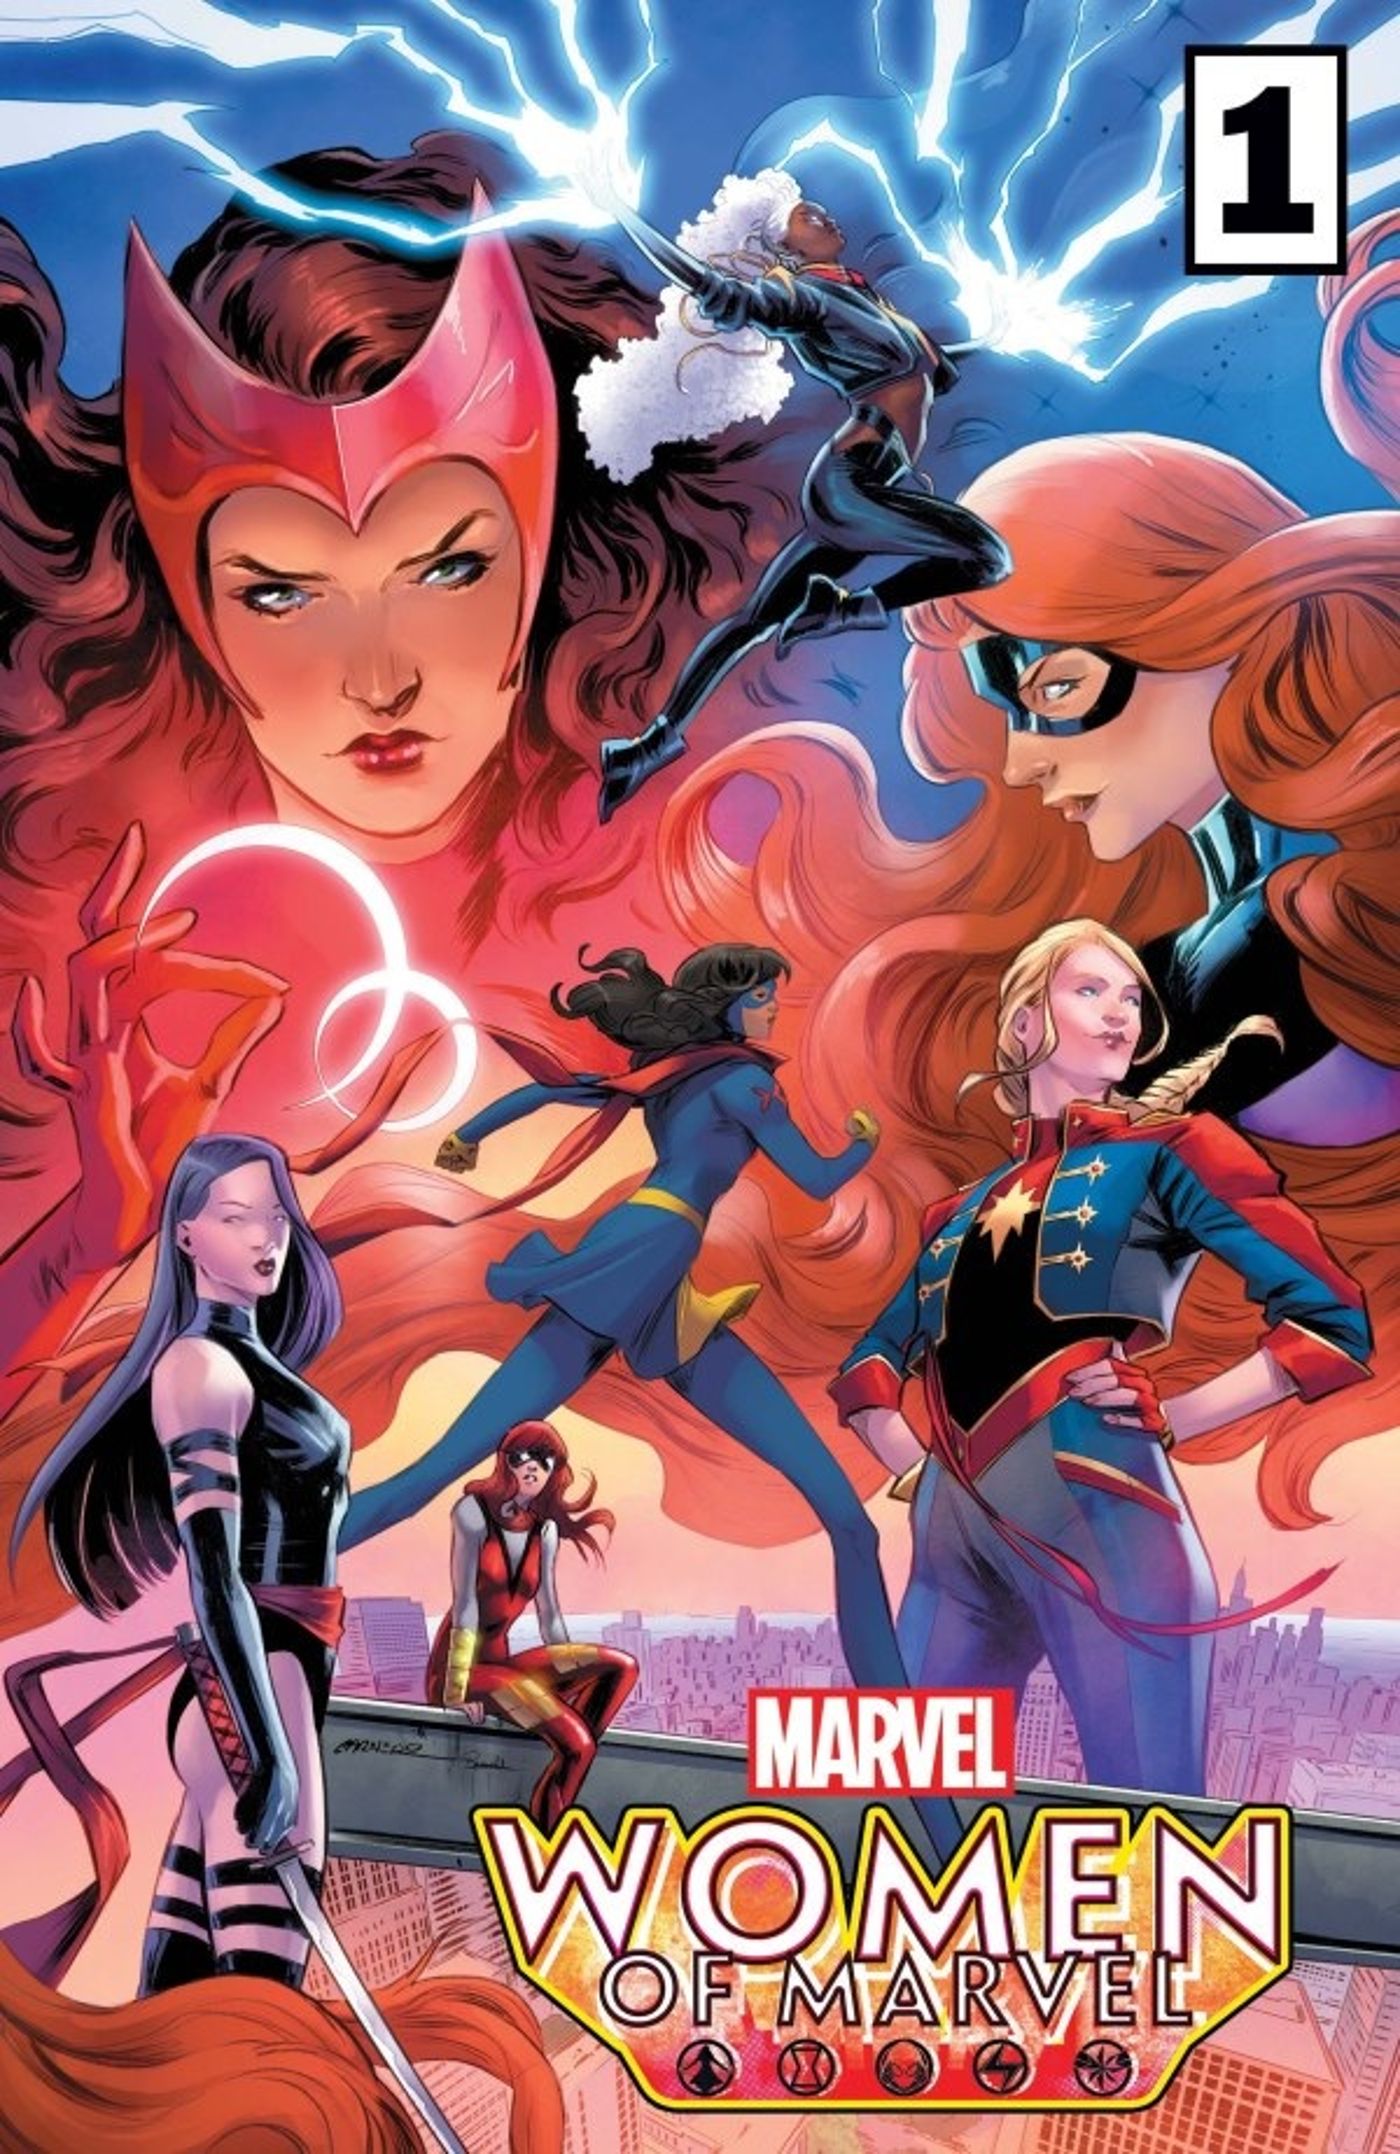 Women of Marvel #1 Cover Art Featuring Scarlet Witch, Ms. Marvel and Captain Marvel